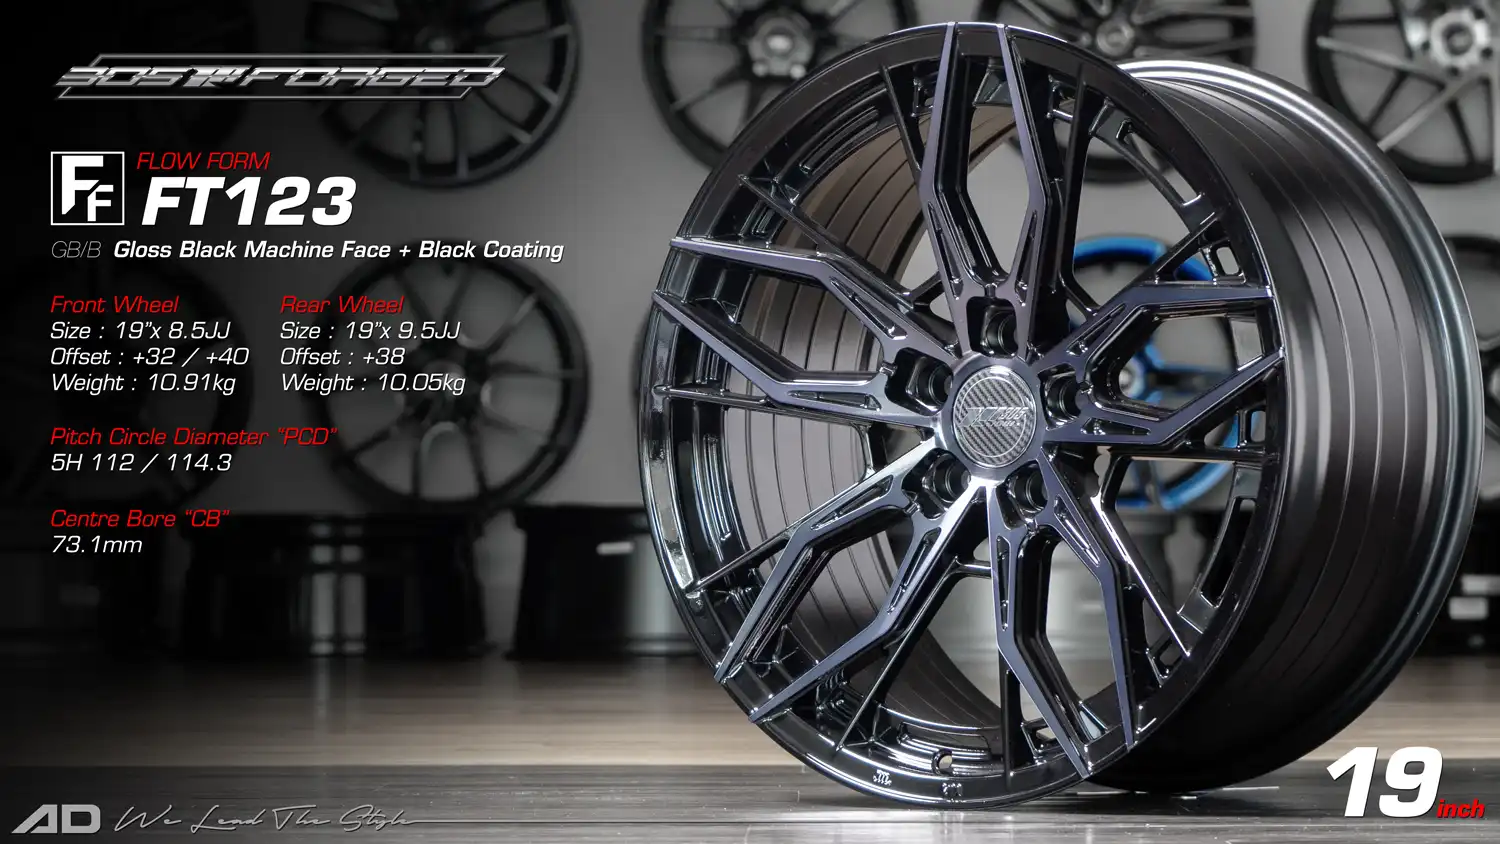 Ad wheels | Bos Forged 123 19 inch 5H112/114.3